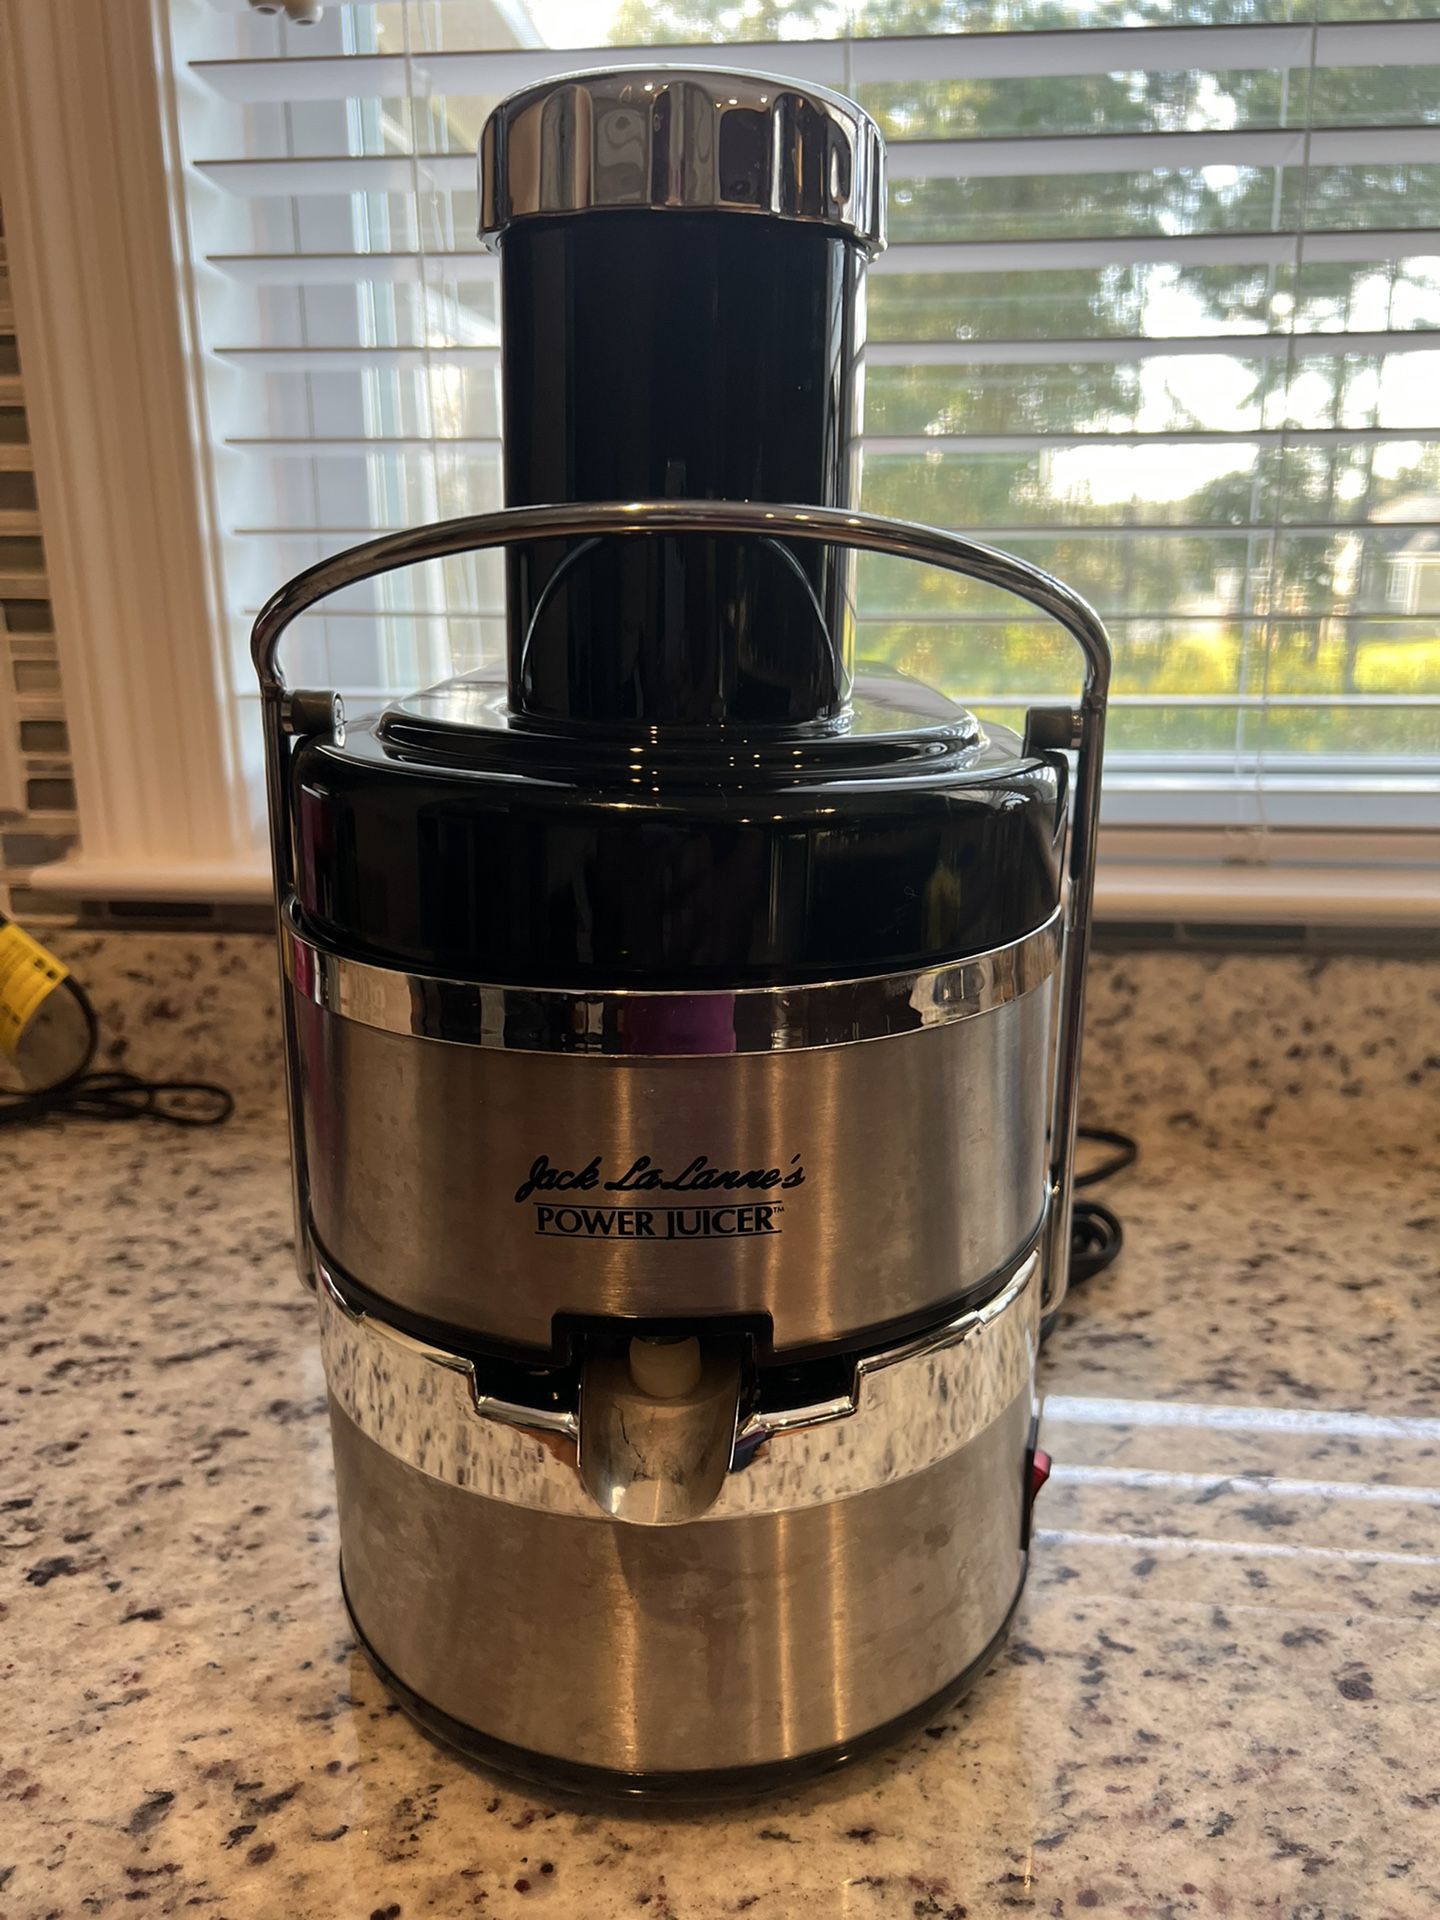 Power Juicer For Healthy Detox Juices 